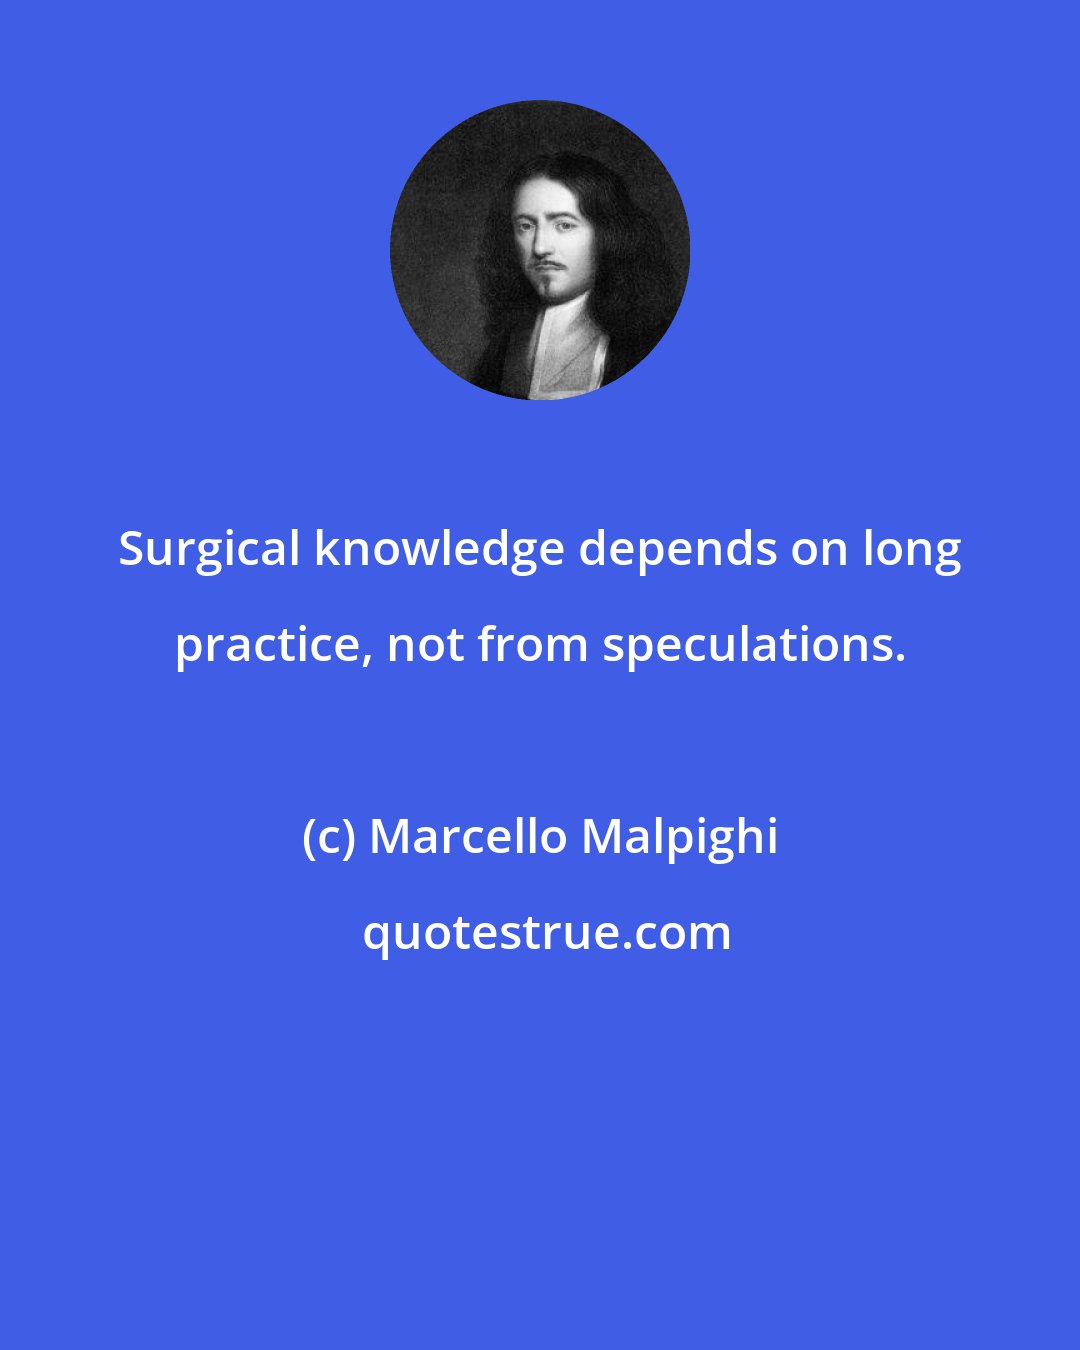 Marcello Malpighi: Surgical knowledge depends on long practice, not from speculations.